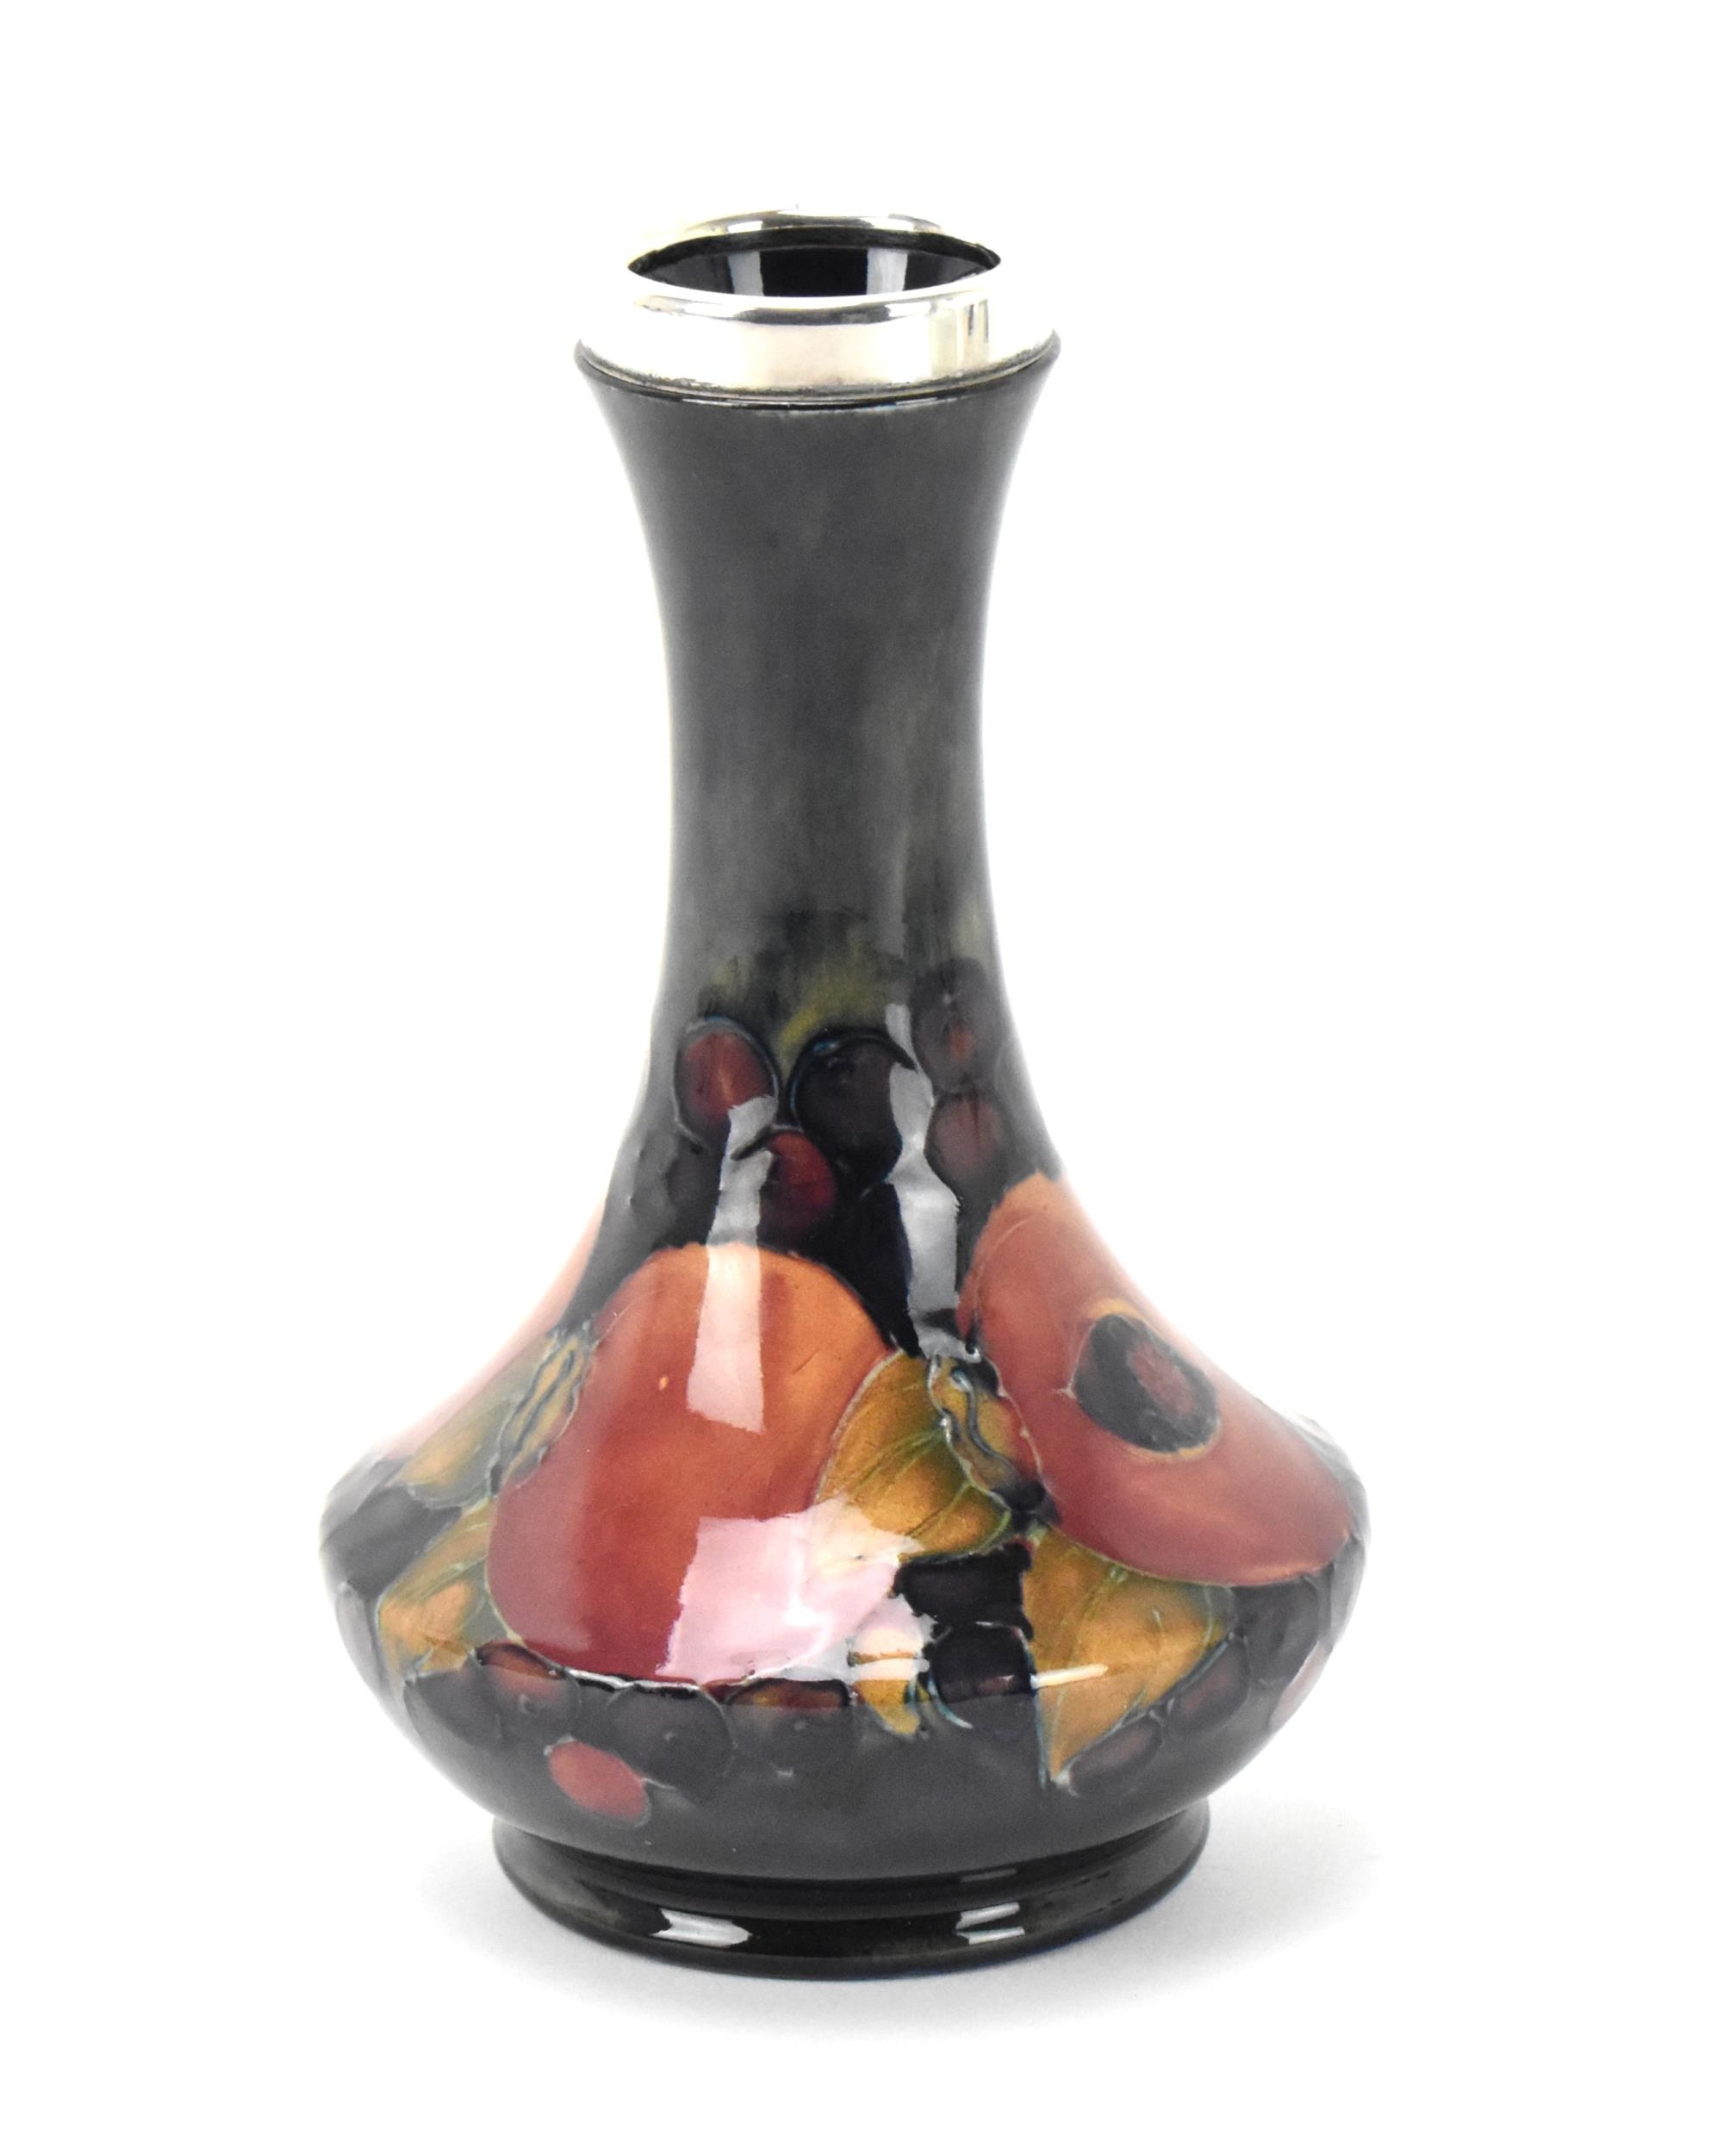 A Moorcroft pottery vase by Walter Moorcroft (1917-2002), in the 'Pomegranate' pattern, with